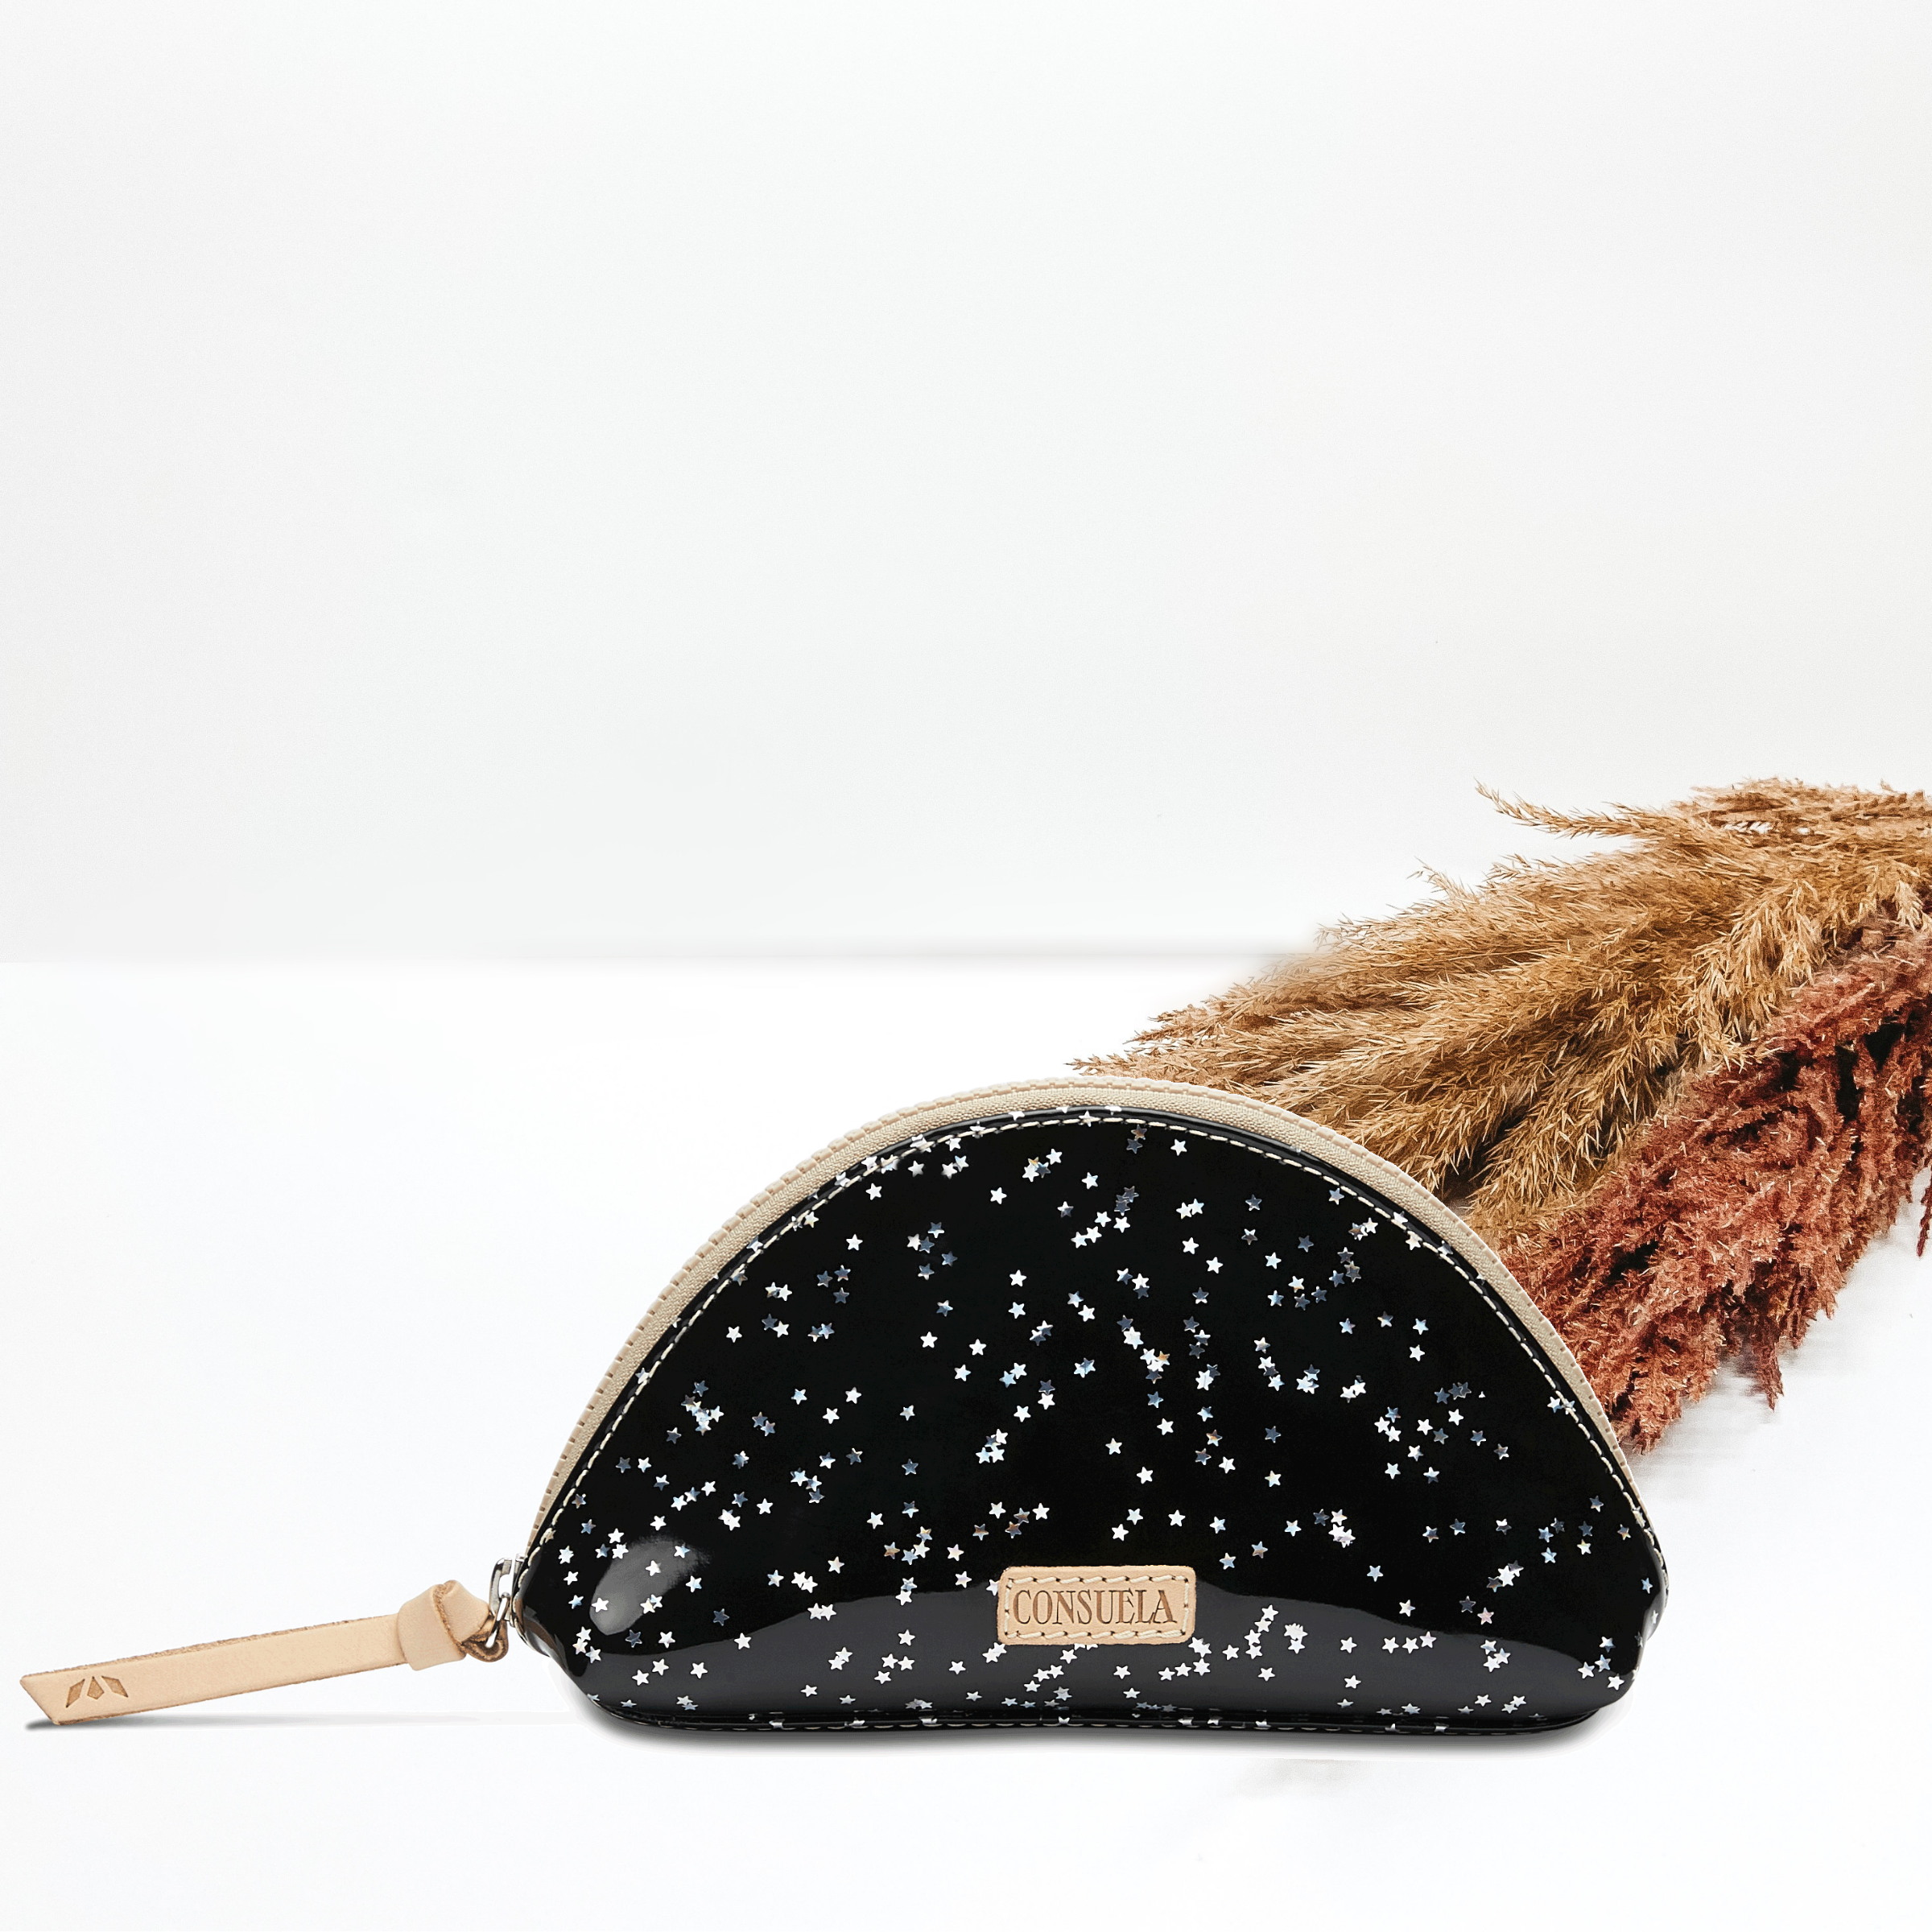 Consuela | Dreamy Medium Cosmetic Case - Giddy Up Glamour Boutique